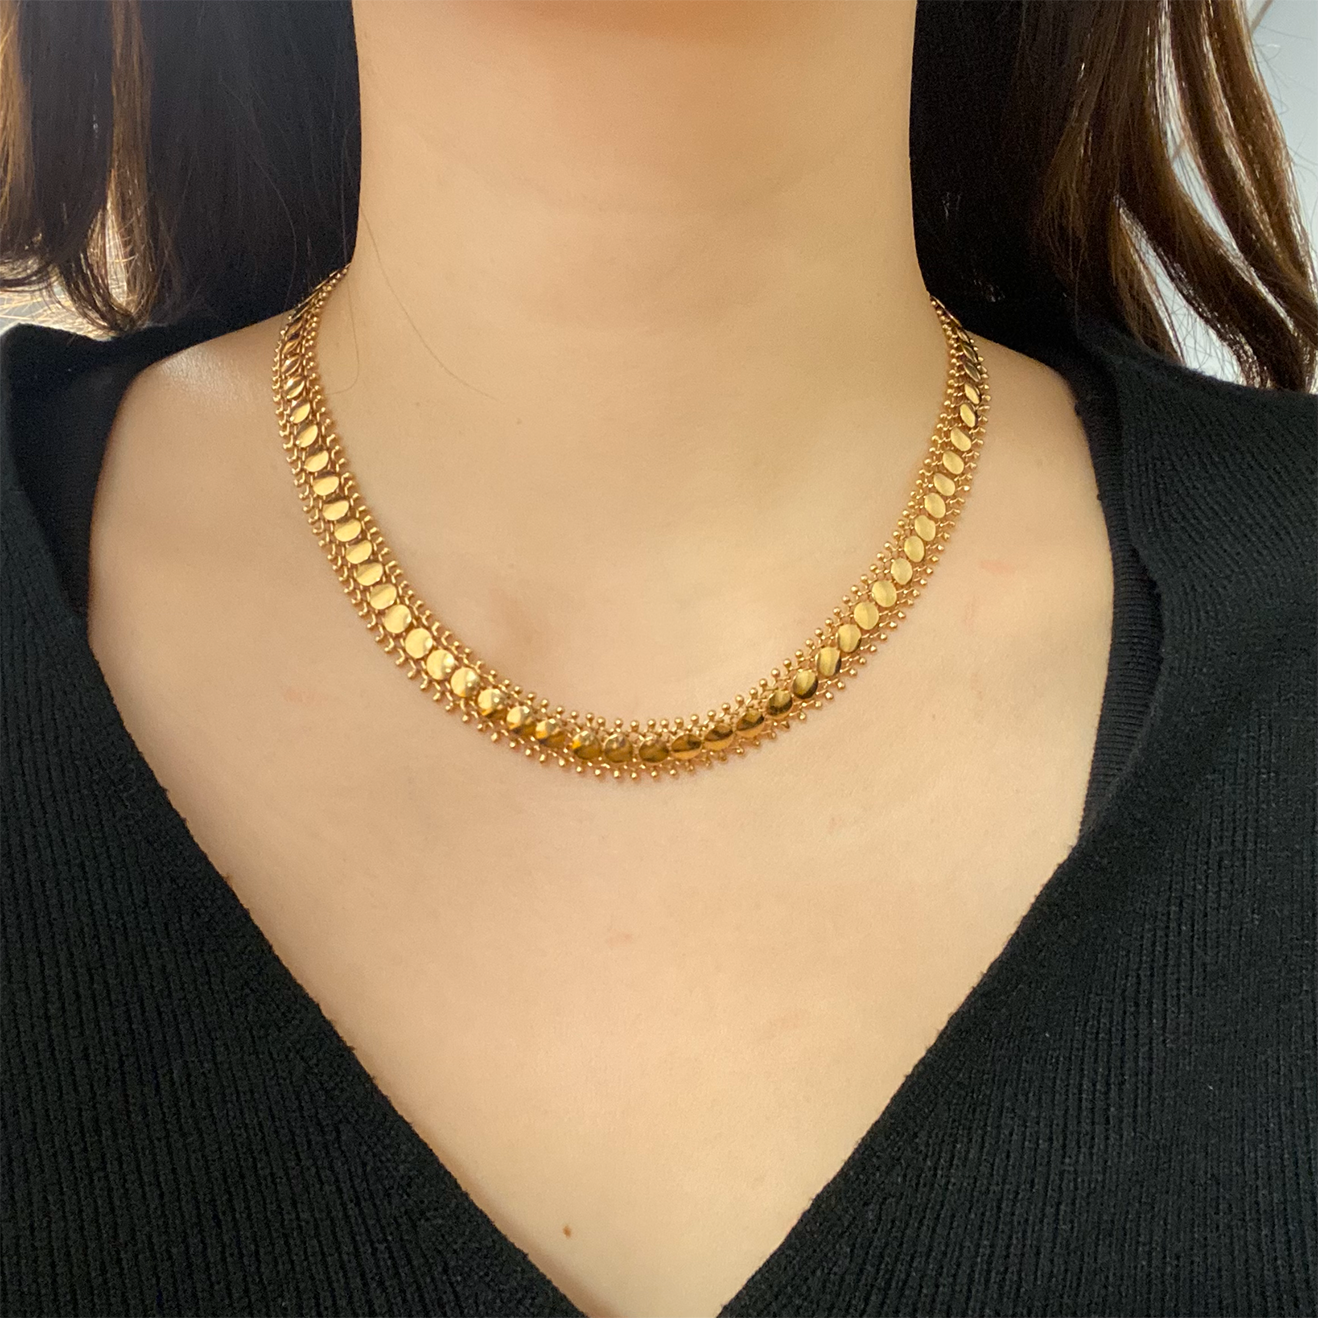 Retro 18KT Yellow Gold Necklace worn on neck